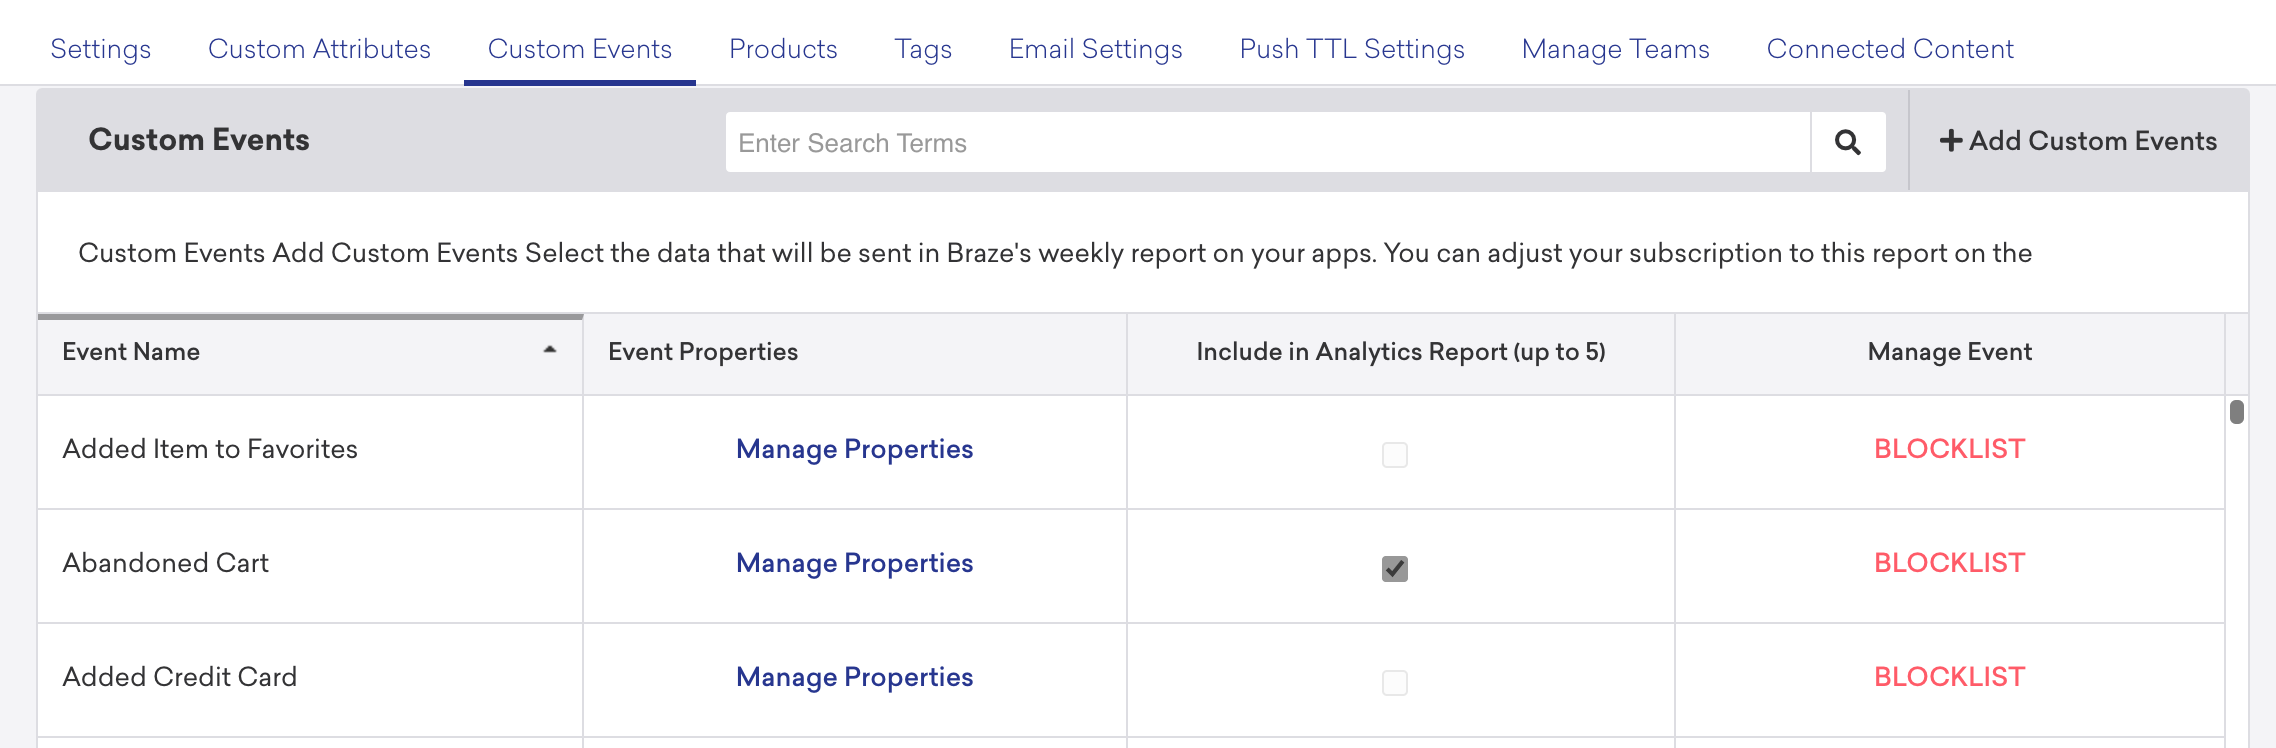 Selecting events to be included in the Analytics Report